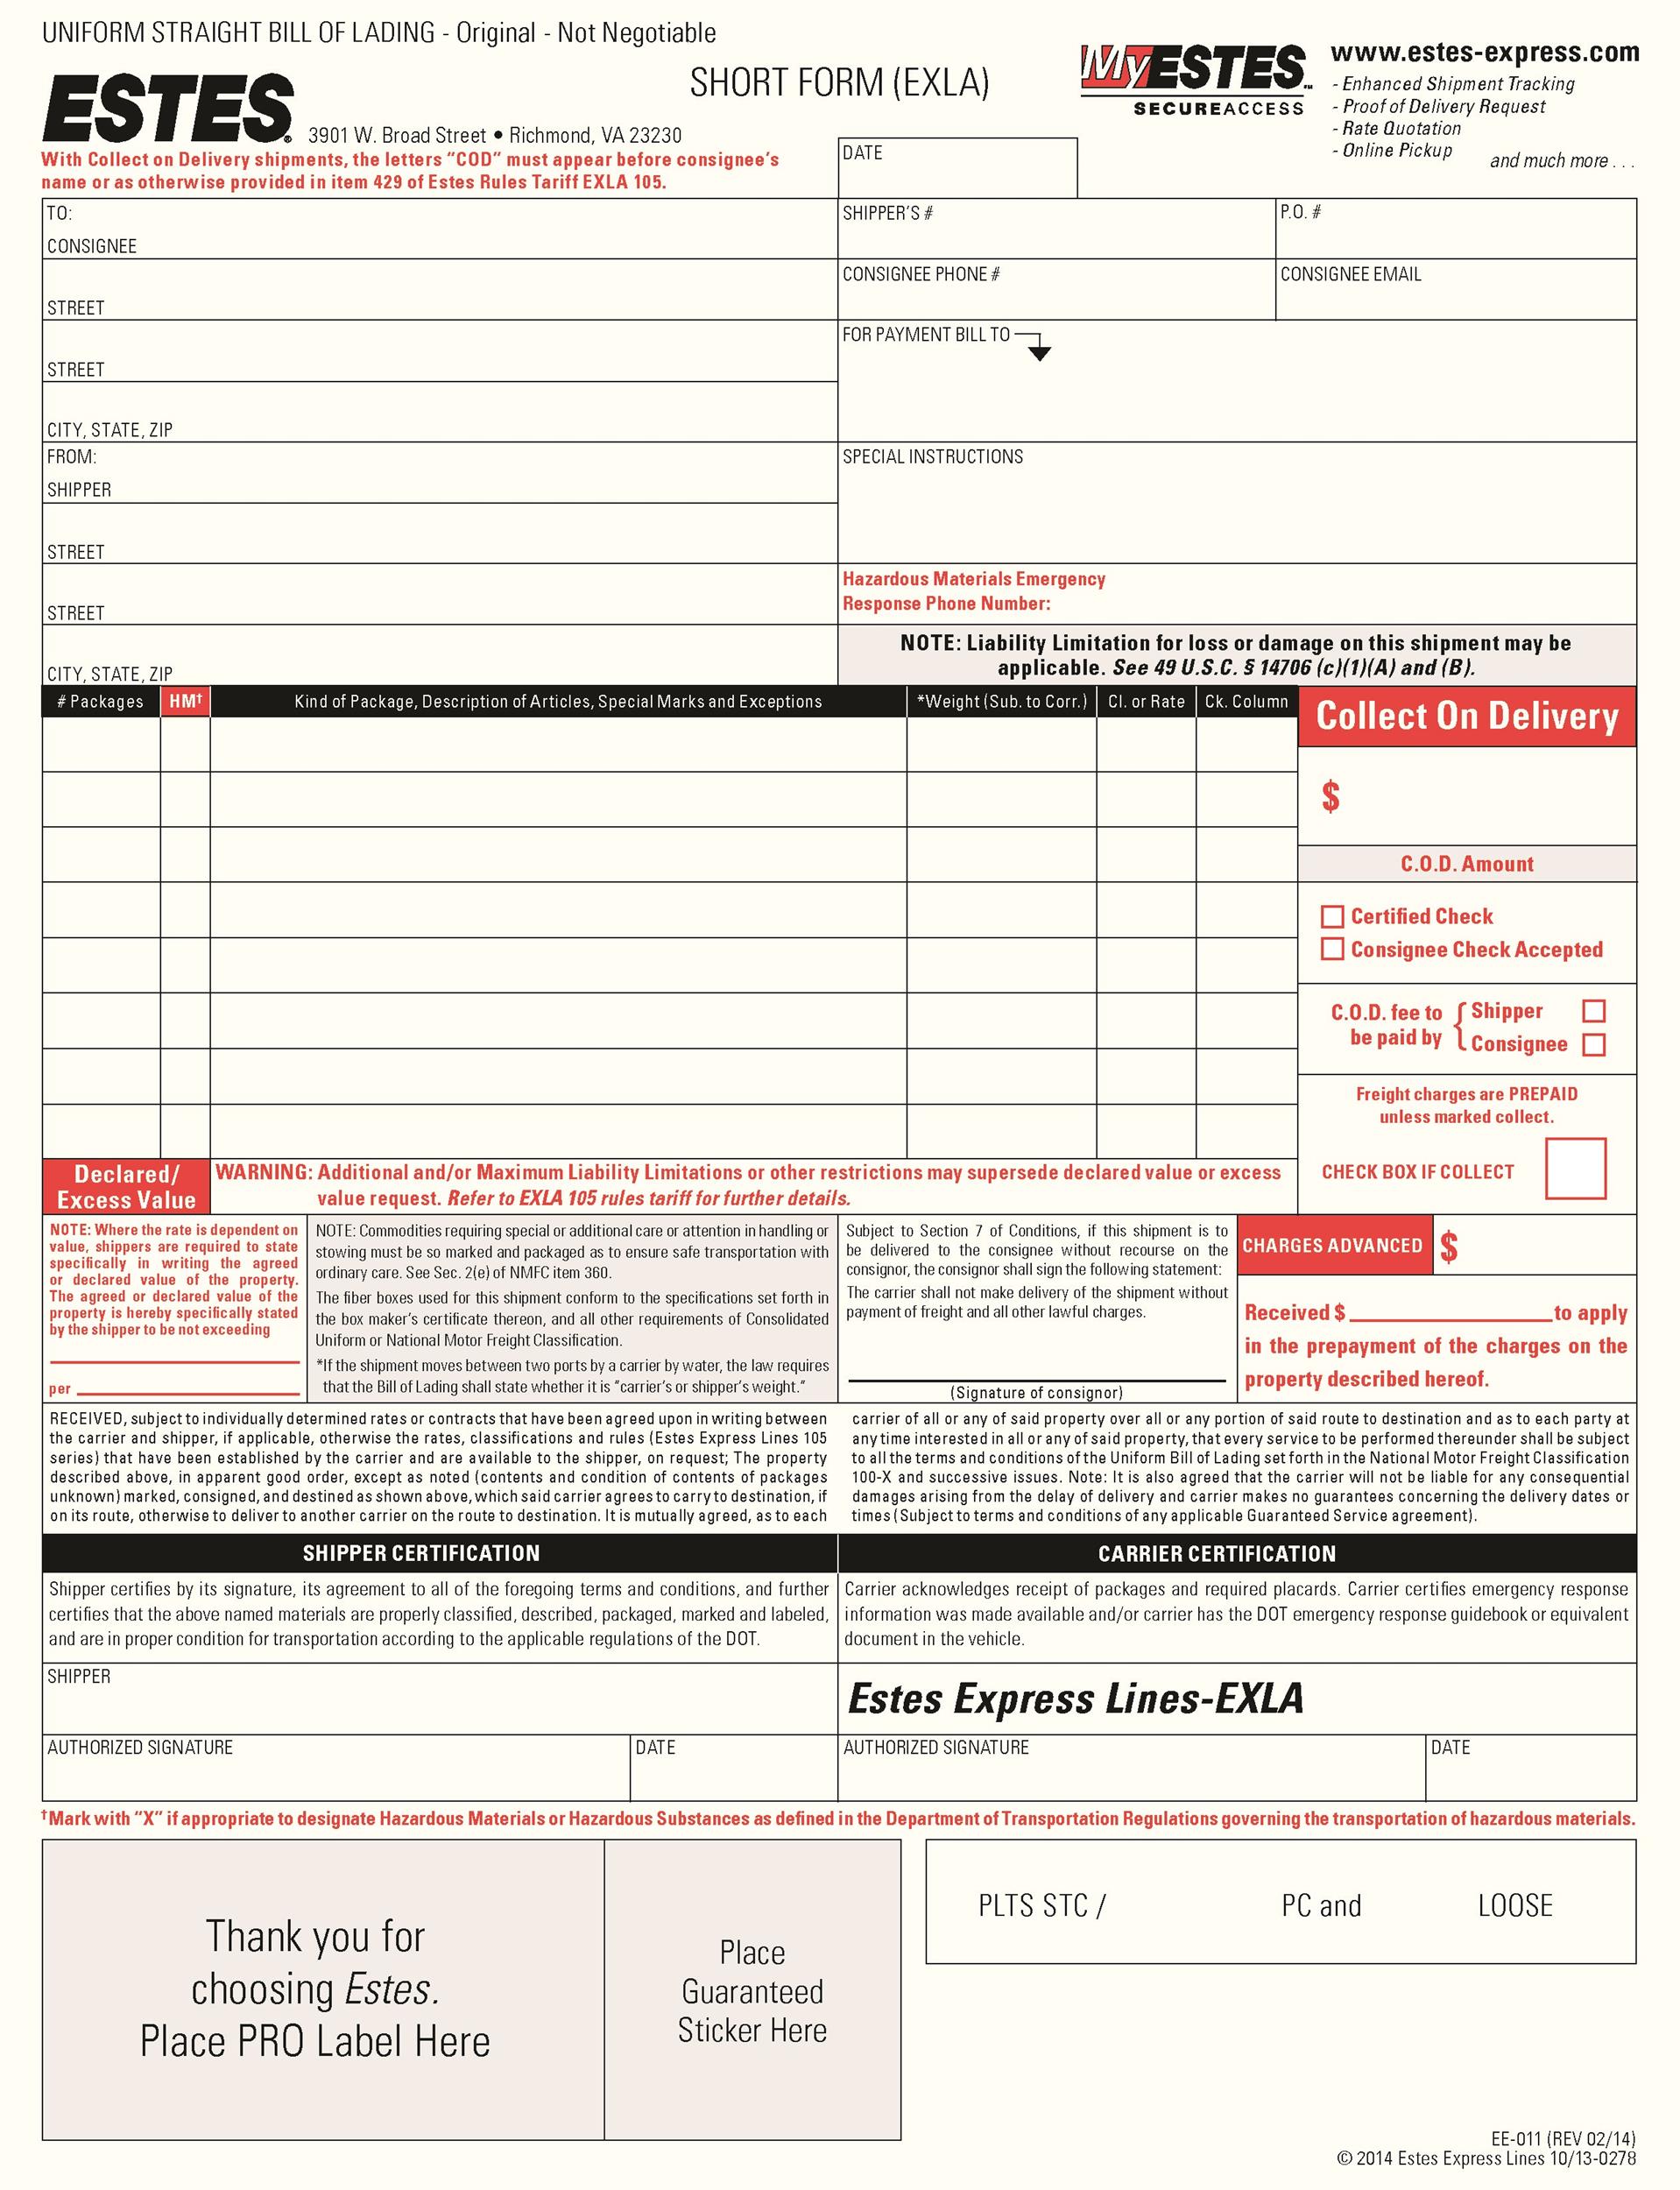 40 Free Bill of Lading Forms & Templates ᐅ TemplateLab